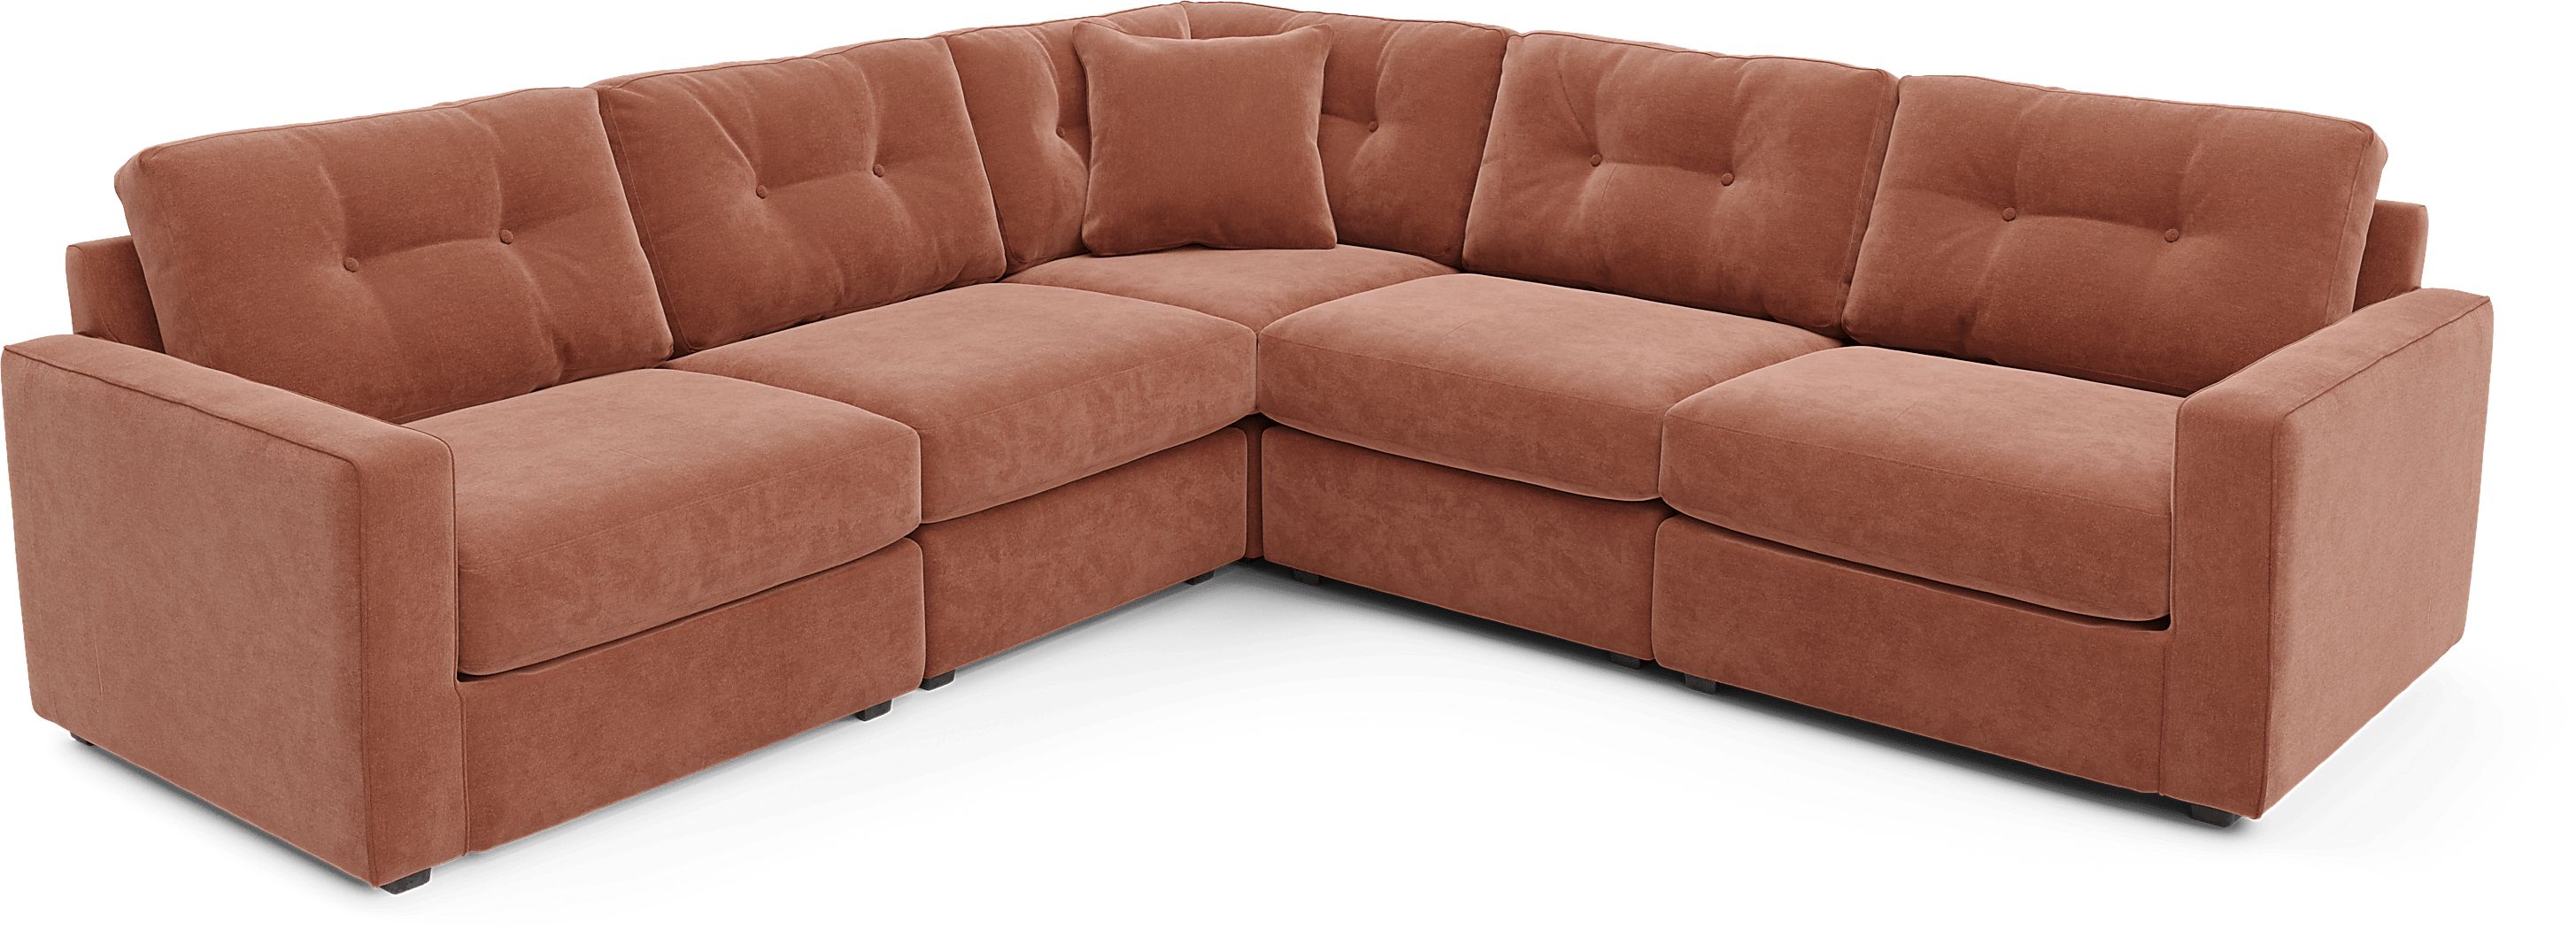 Aberlin Court Beige 3 Pc Sectional